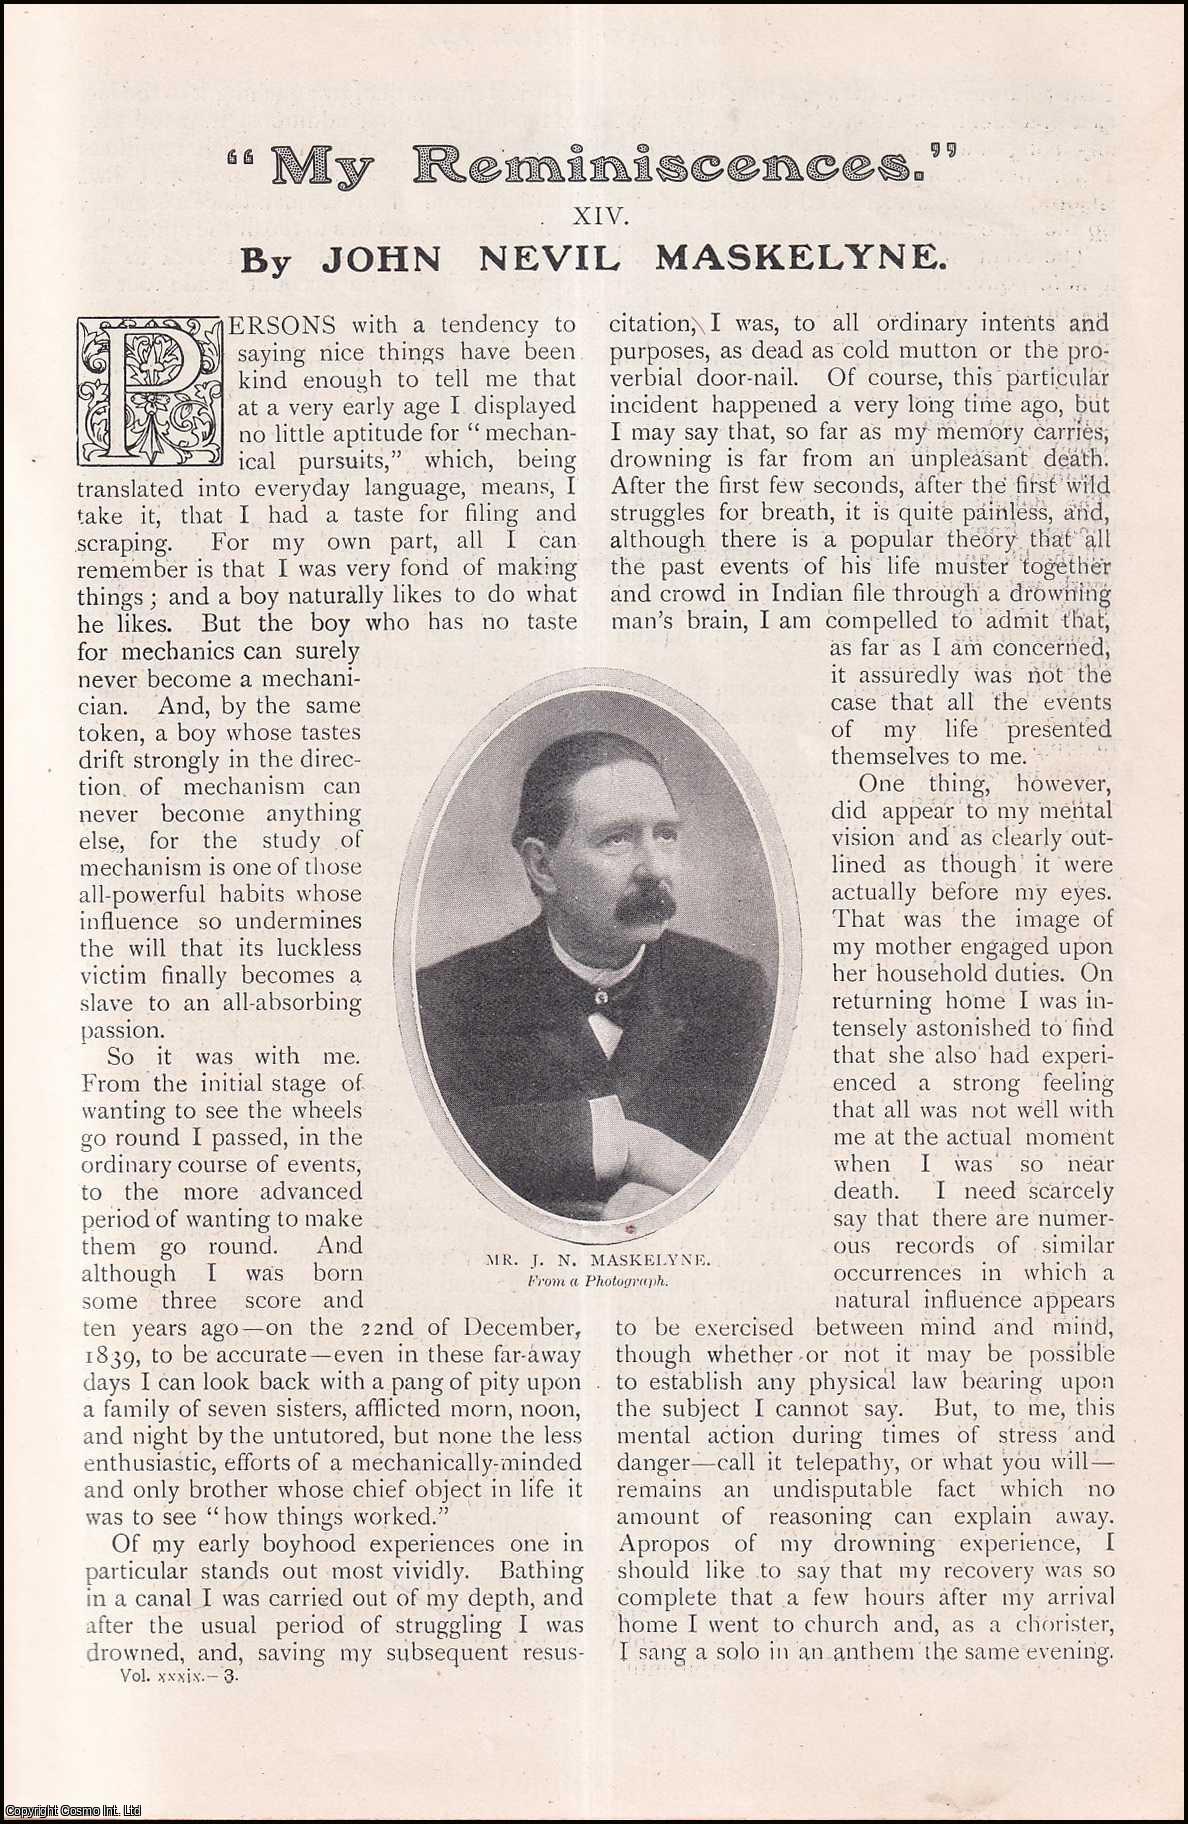 No Author Stated - John Nevil Maskelyne : Magician. My Reminiscences. An uncommon original article from The Strand Magazine, 1910.